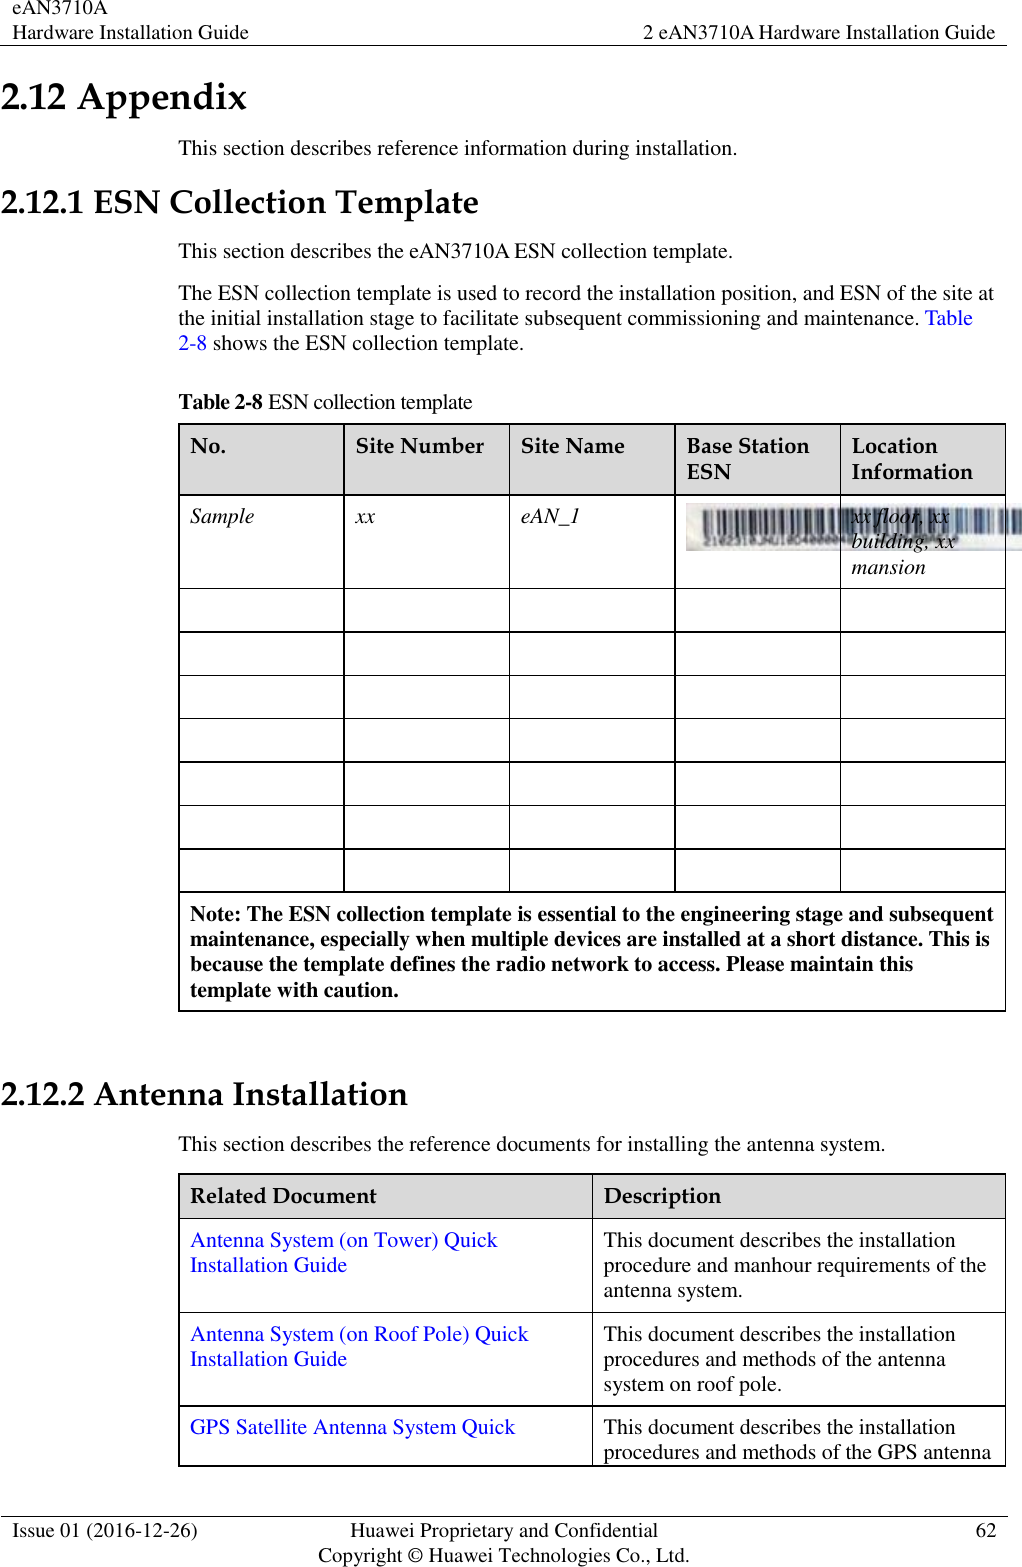 eAN3710A Hardware Installation Guide 2 eAN3710A Hardware Installation Guide  Issue 01 (2016-12-26) Huawei Proprietary and Confidential                                     Copyright © Huawei Technologies Co., Ltd. 62  2.12 Appendix This section describes reference information during installation.   2.12.1 ESN Collection Template This section describes the eAN3710A ESN collection template. The ESN collection template is used to record the installation position, and ESN of the site at the initial installation stage to facilitate subsequent commissioning and maintenance. Table 2-8 shows the ESN collection template. Table 2-8 ESN collection template No. Site Number Site Name Base Station ESN Location Information Sample xx eAN_1  xx floor, xx building, xx   mansion                                    Note: The ESN collection template is essential to the engineering stage and subsequent maintenance, especially when multiple devices are installed at a short distance. This is because the template defines the radio network to access. Please maintain this template with caution.  2.12.2 Antenna Installation This section describes the reference documents for installing the antenna system. Related Document Description Antenna System (on Tower) Quick Installation Guide This document describes the installation procedure and manhour requirements of the antenna system. Antenna System (on Roof Pole) Quick Installation Guide This document describes the installation procedures and methods of the antenna system on roof pole. GPS Satellite Antenna System Quick This document describes the installation procedures and methods of the GPS antenna 